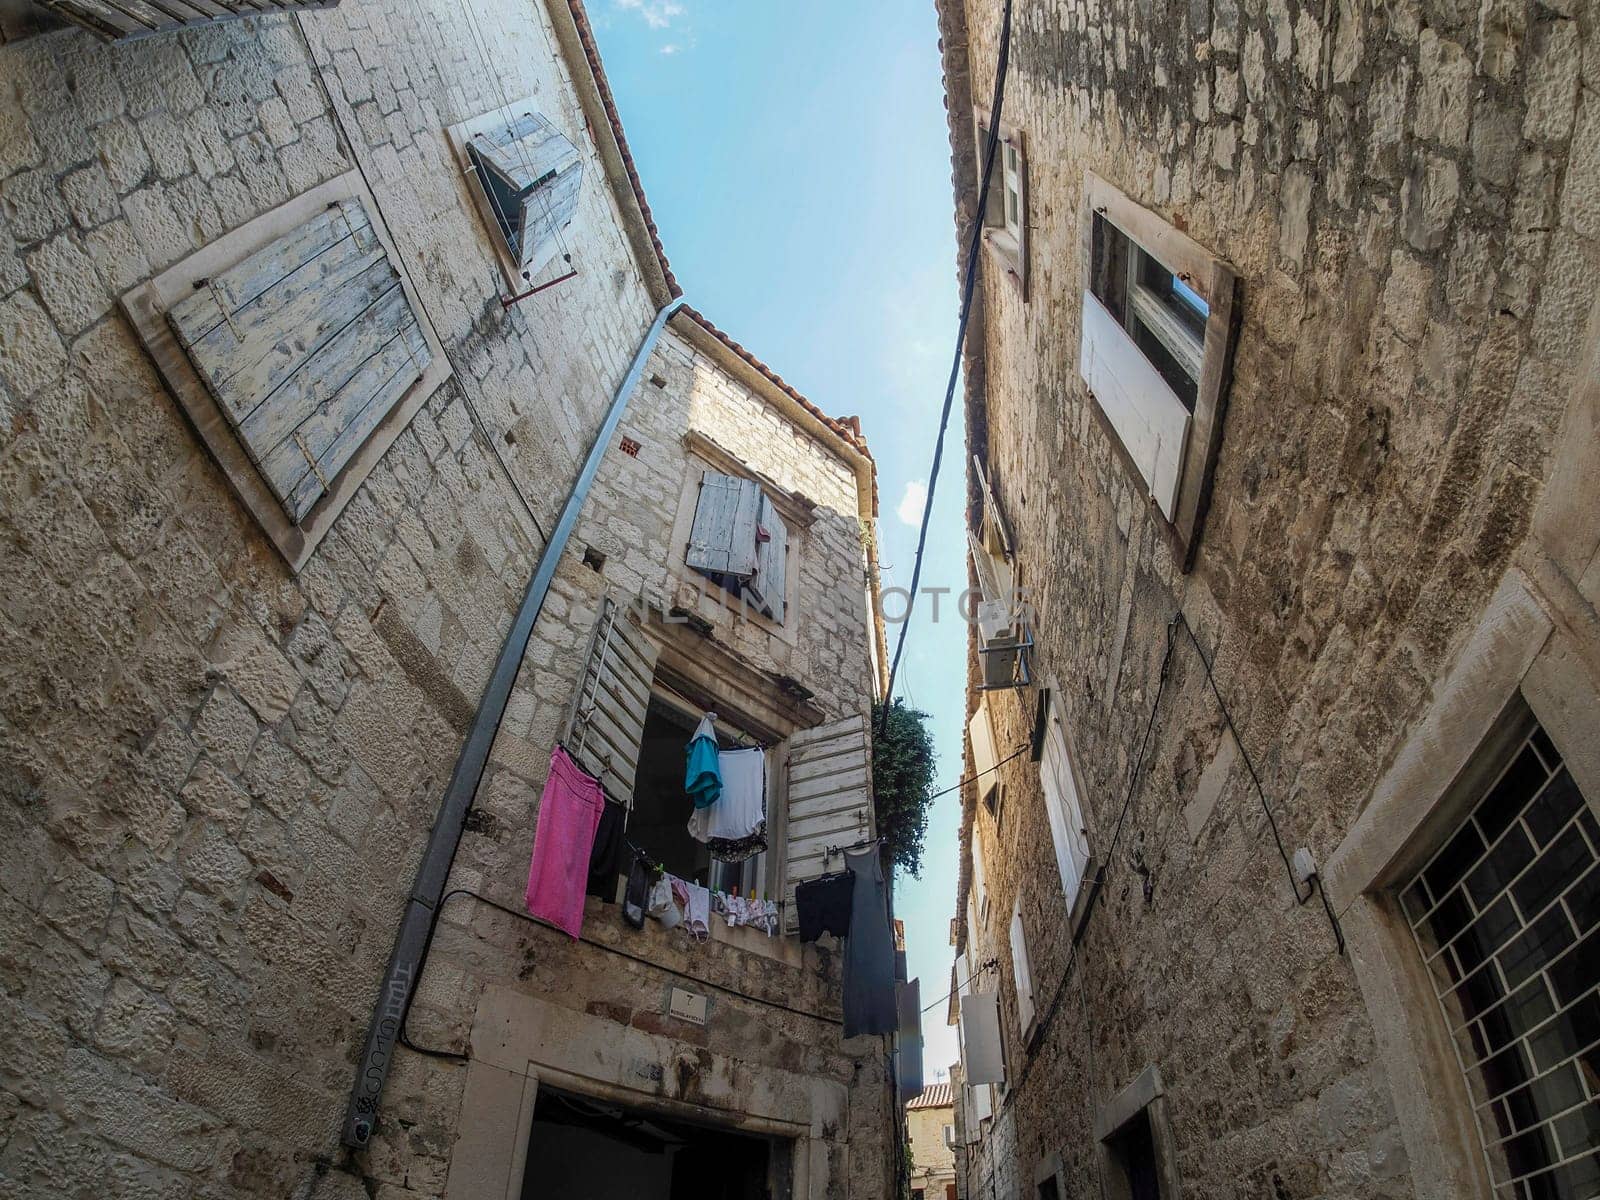 Trogir medieval town in Dalmatia Croatia UNESCO World Heritage Site Old city and building detail by AndreaIzzotti